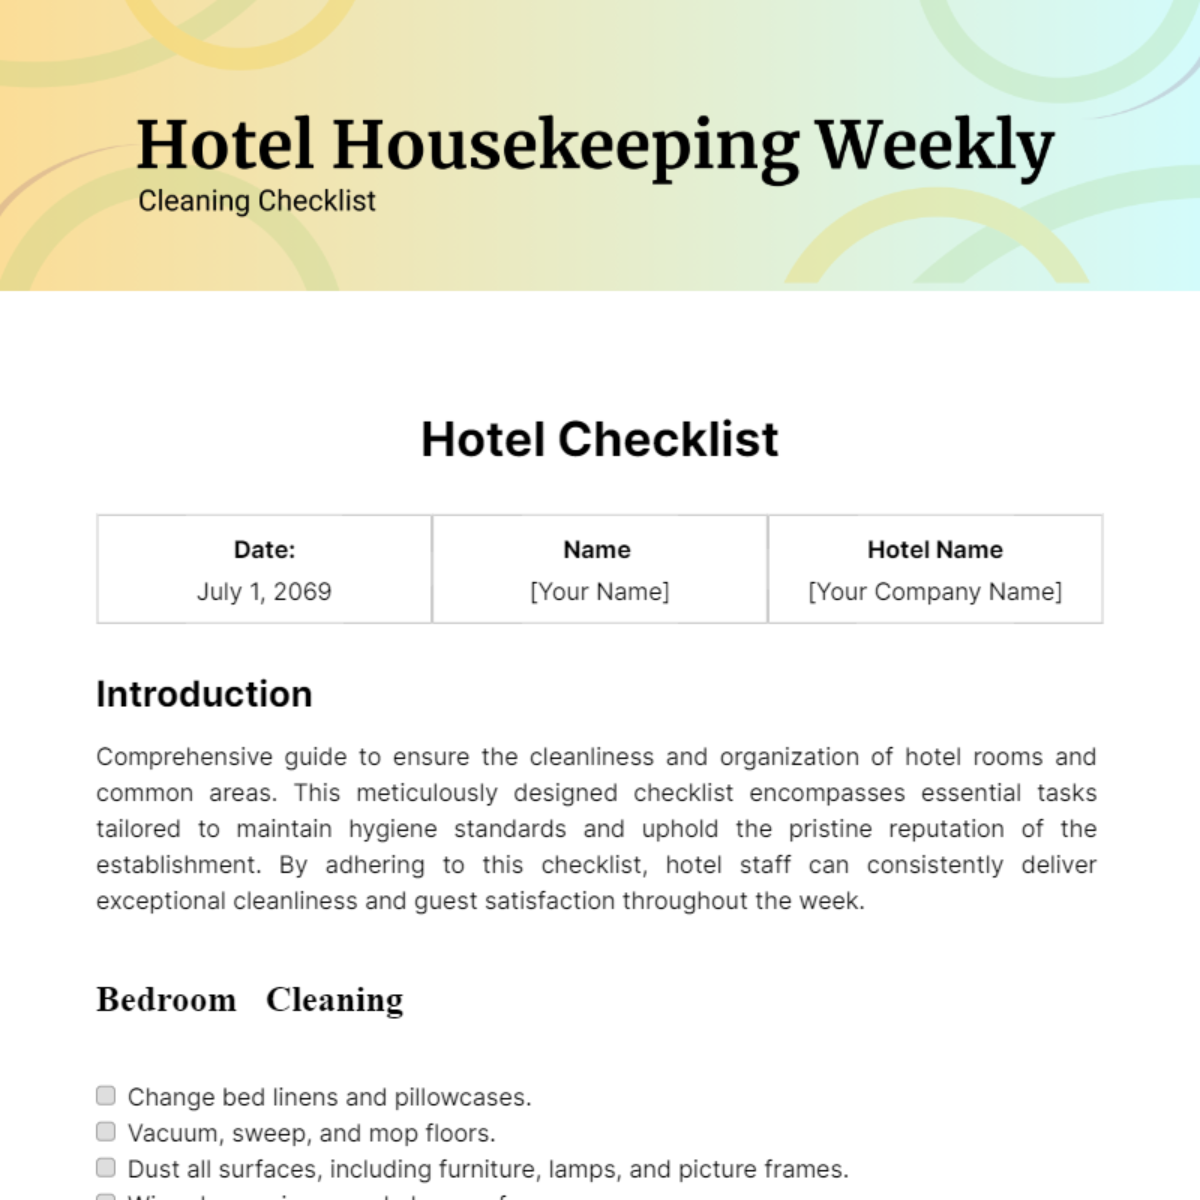 Hotel Housekeeping Weekly Cleaning Checklist Template